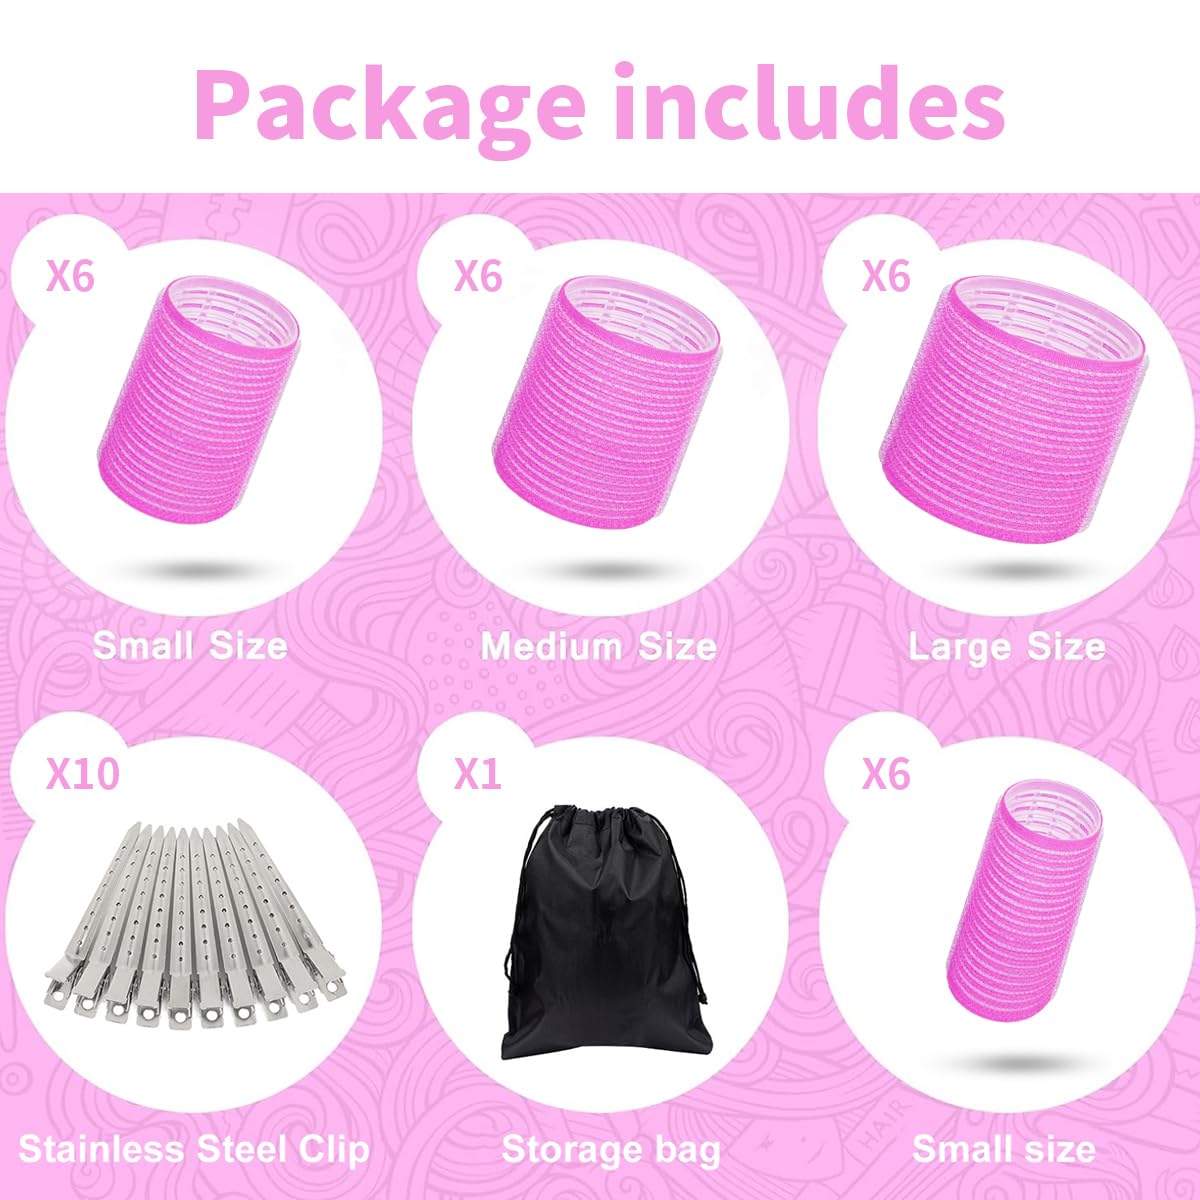 34Pcs Hair Roller Set with Clips, Self-Grip Hair Rollers for Volume, Salon Hairdressing Curlers and DIY Hairstyles, 4 Sizes Rollers Hair Curlers in a Storage Bag